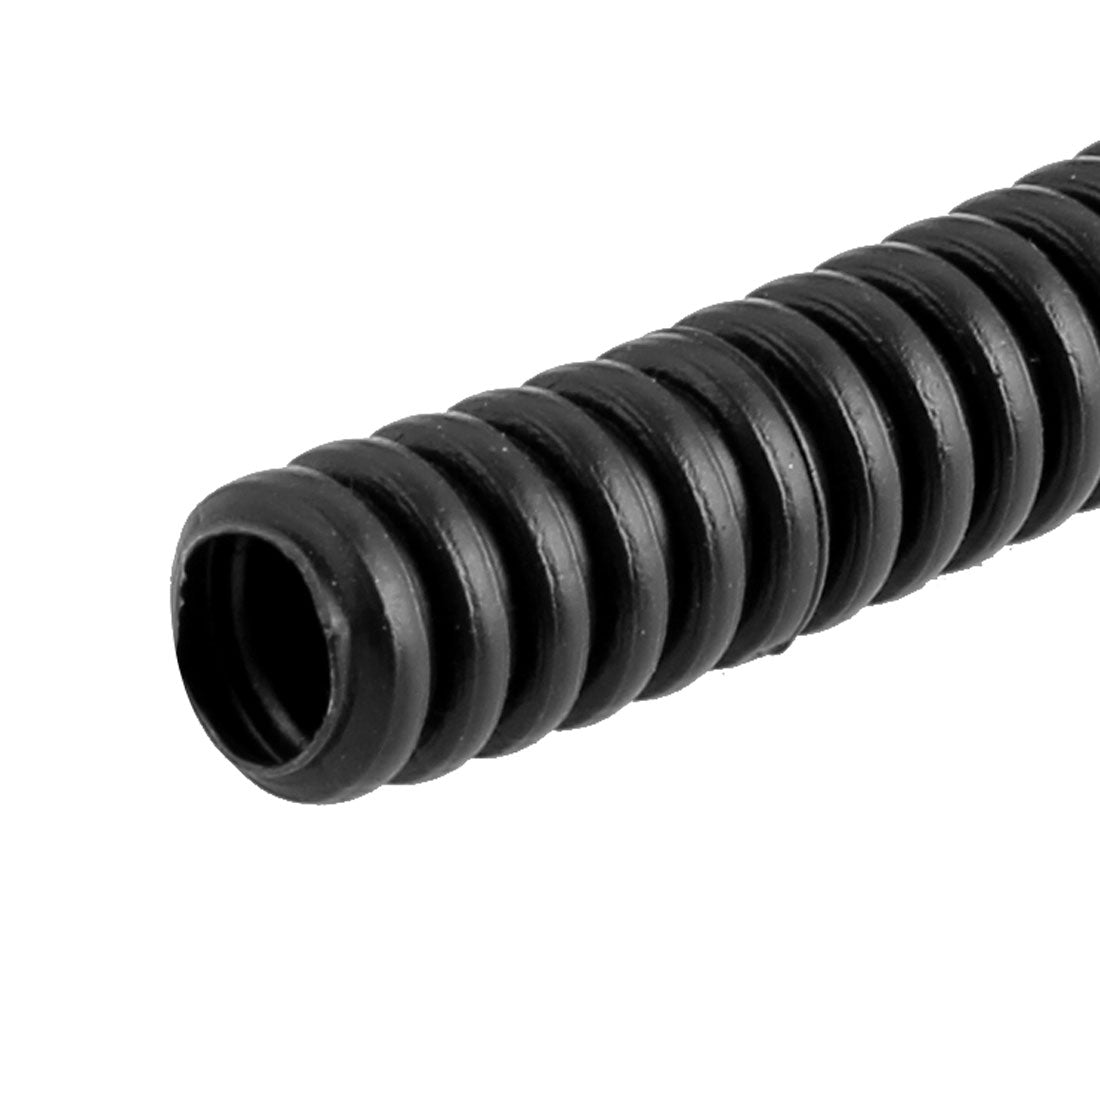 uxcell Uxcell 2.55 M 7 x 10 mm Plastic Corrugated Conduit Tube for Garden,Office Black